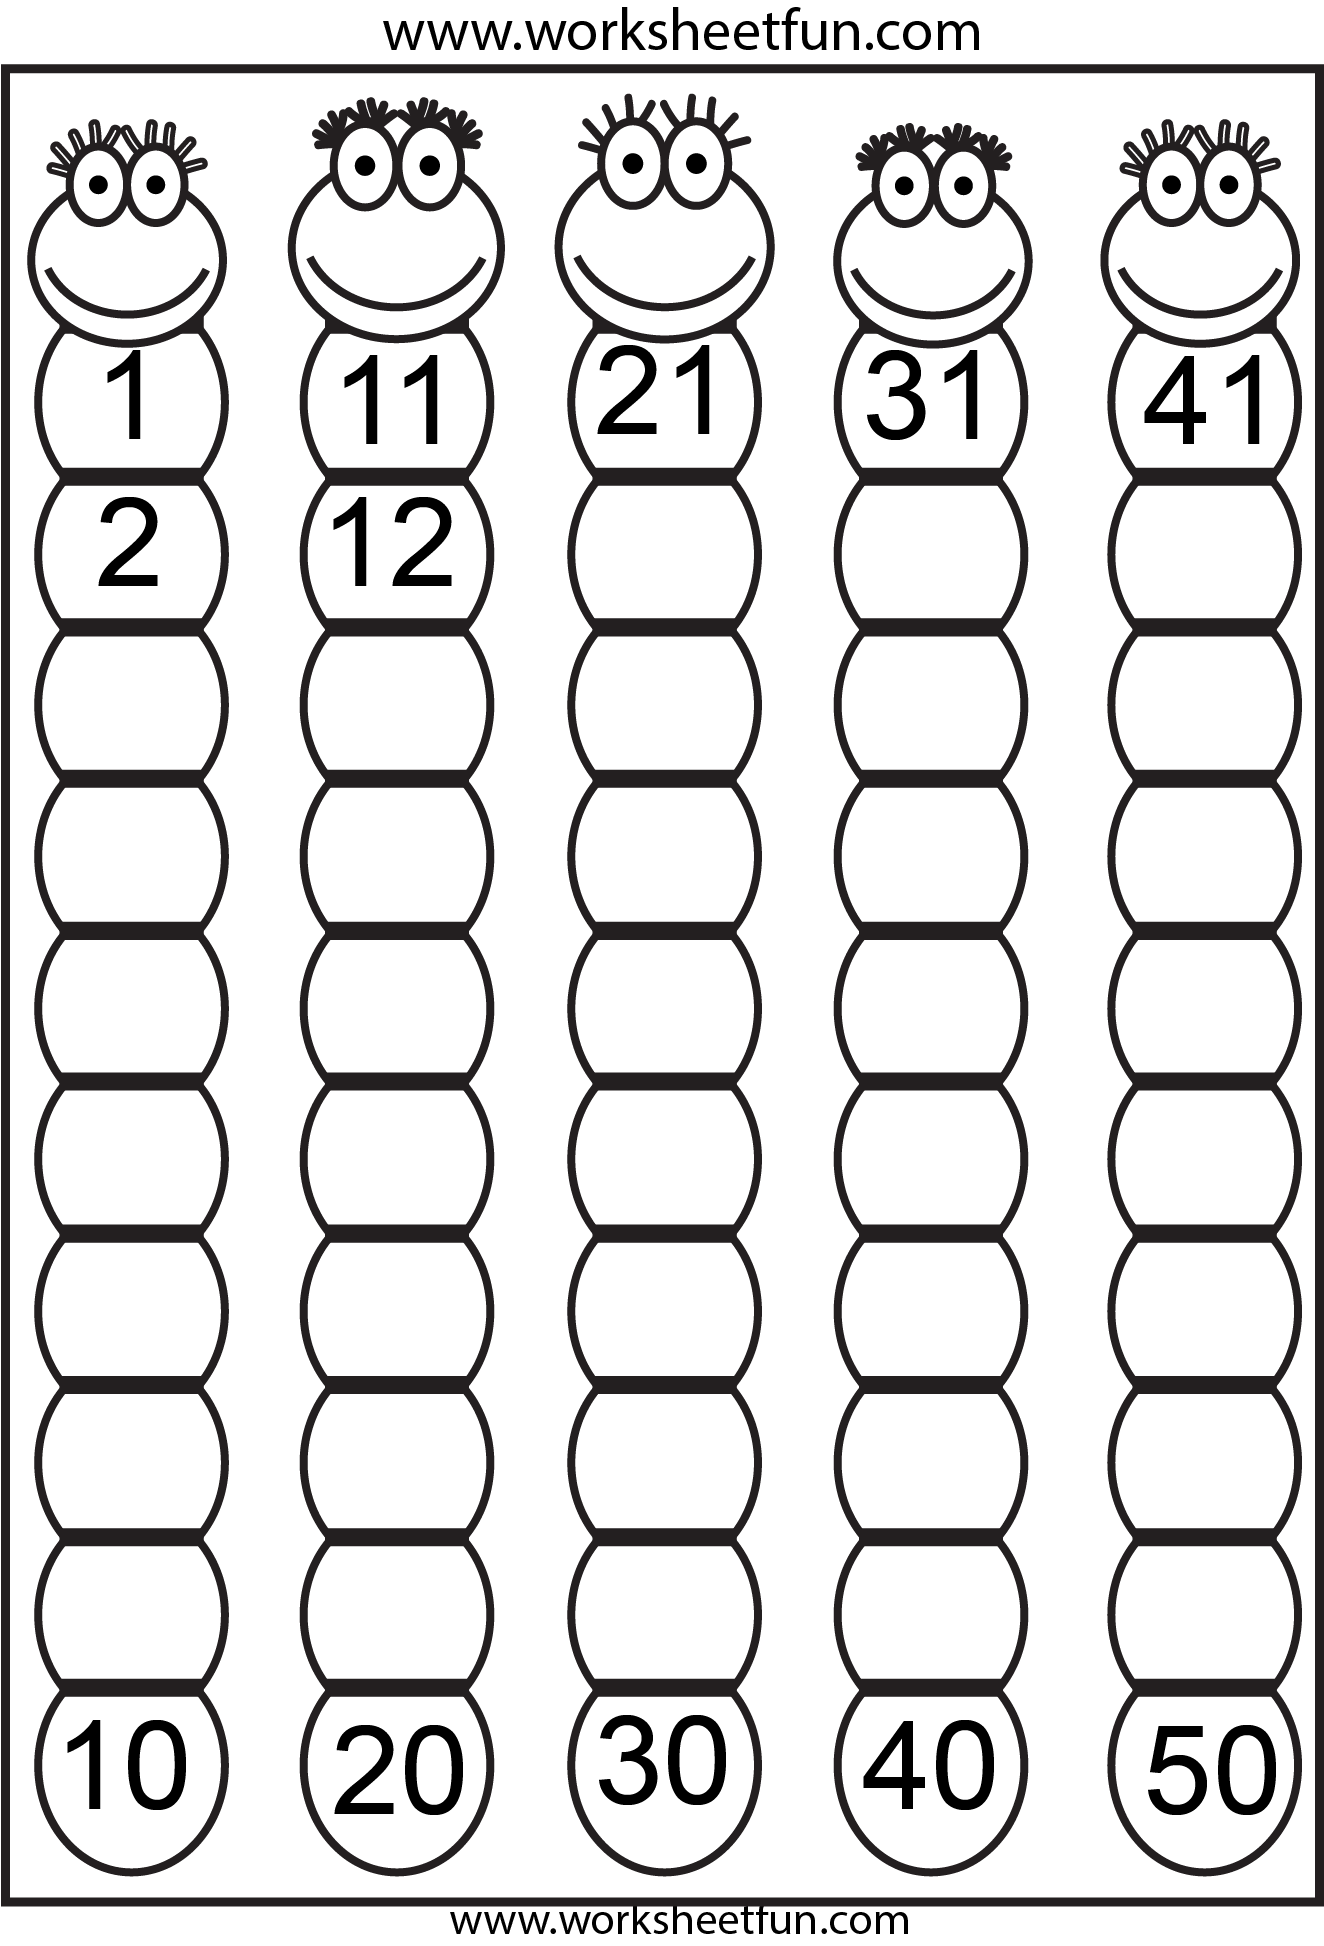 7-best-images-of-number-sheets-1-to-50-printable-printable-number-1